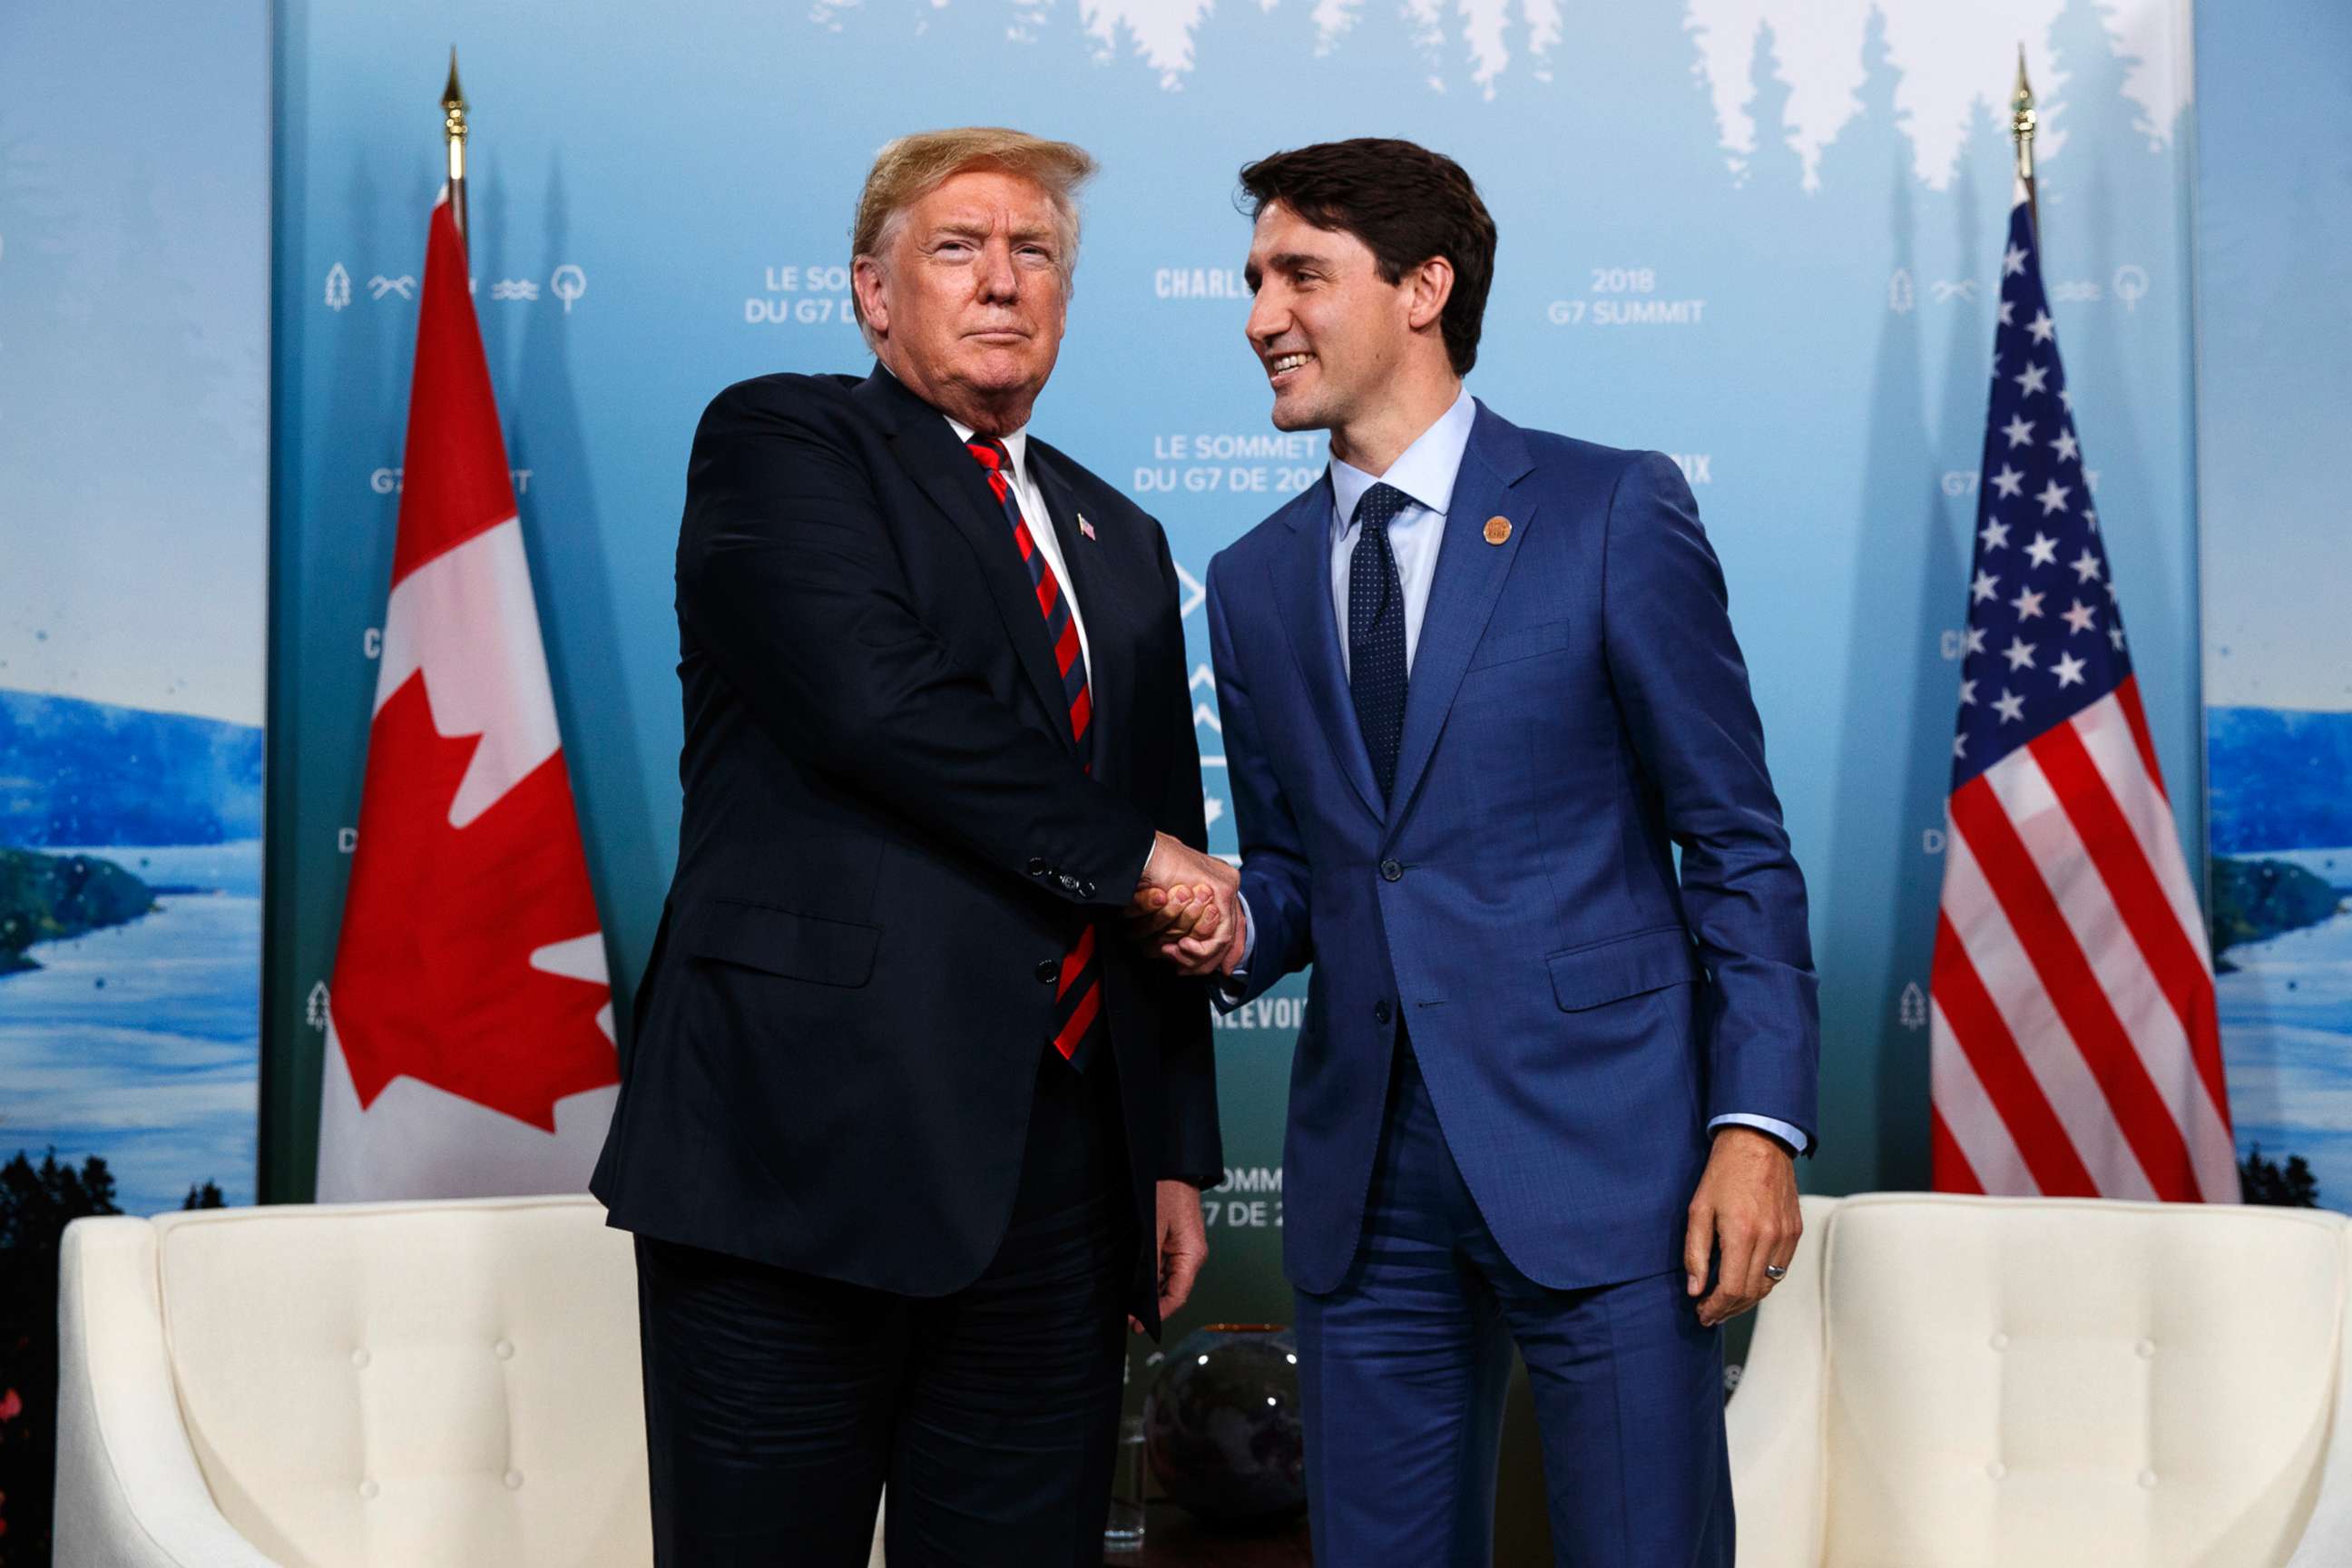 PHOTO: President Donald Trump meets with Canadian Prime Minister Justin Trudeau during the G-7 summit on June 8, 2018, in Charlevoix, Canada.